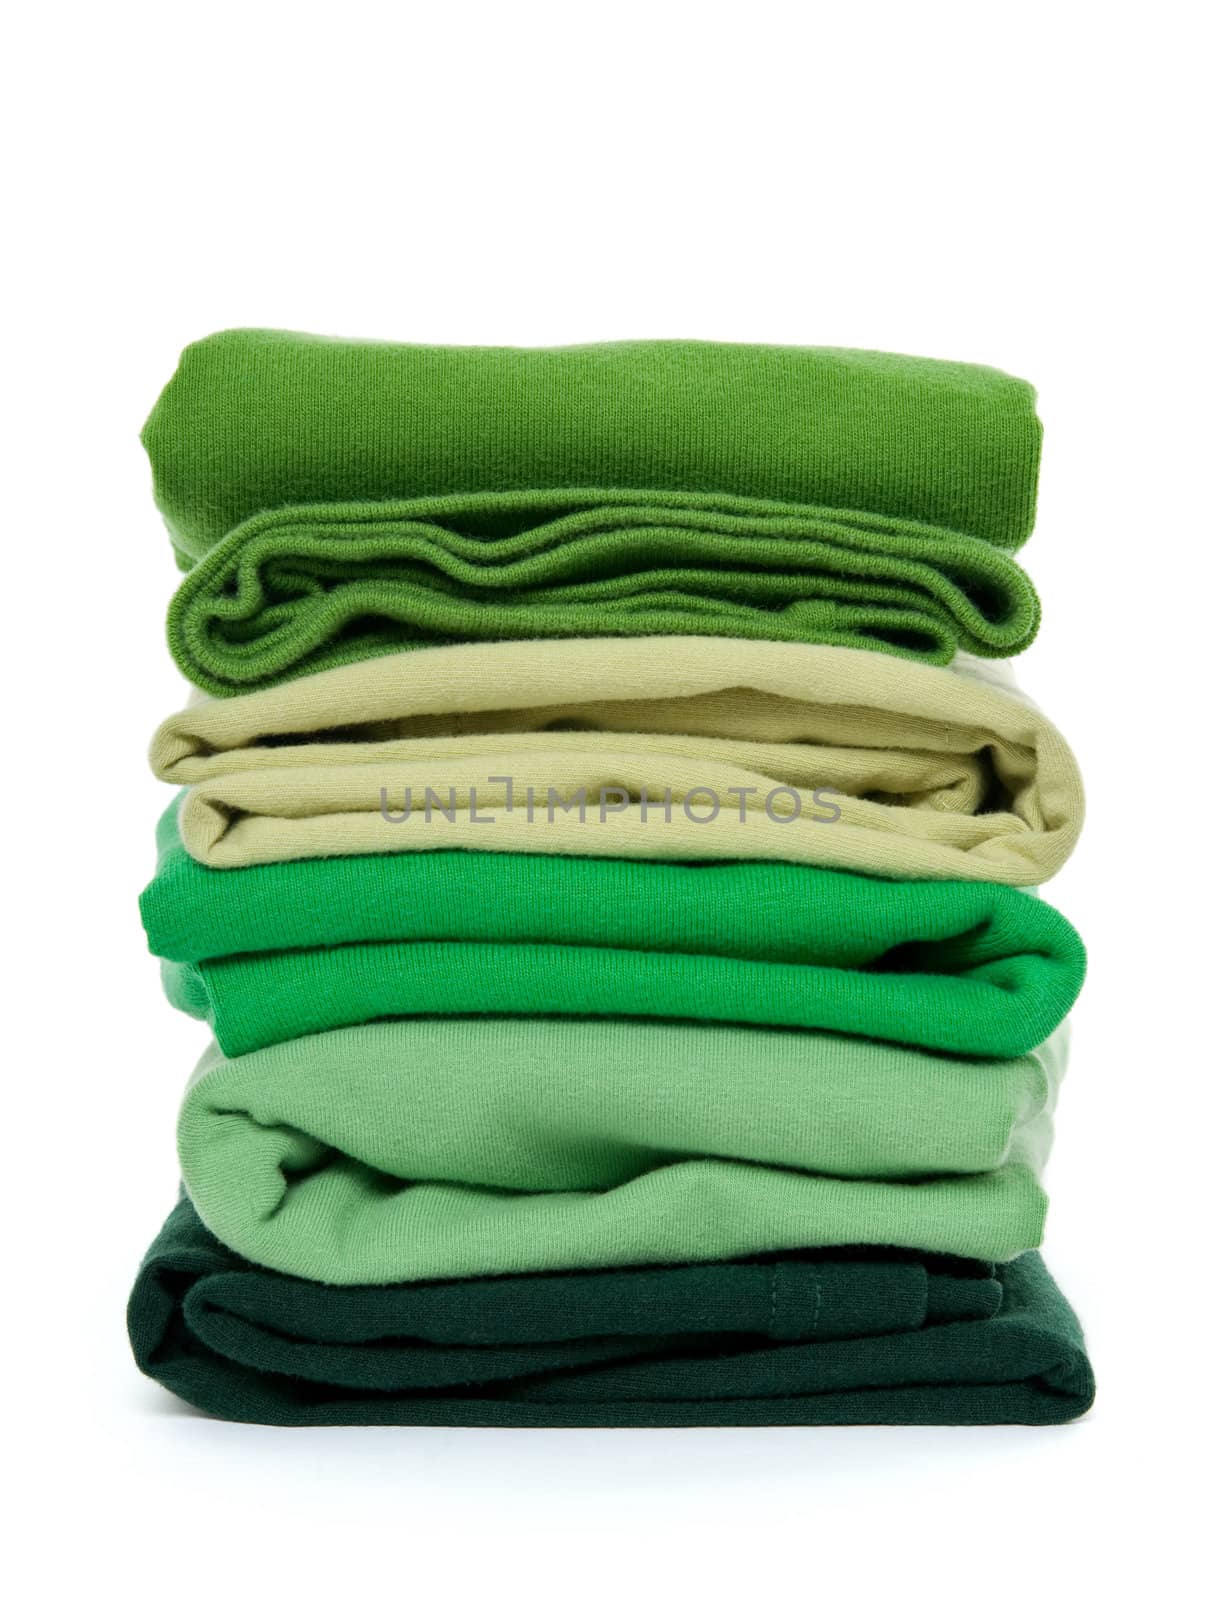 Laundry - pile of green folded clothes on white background.